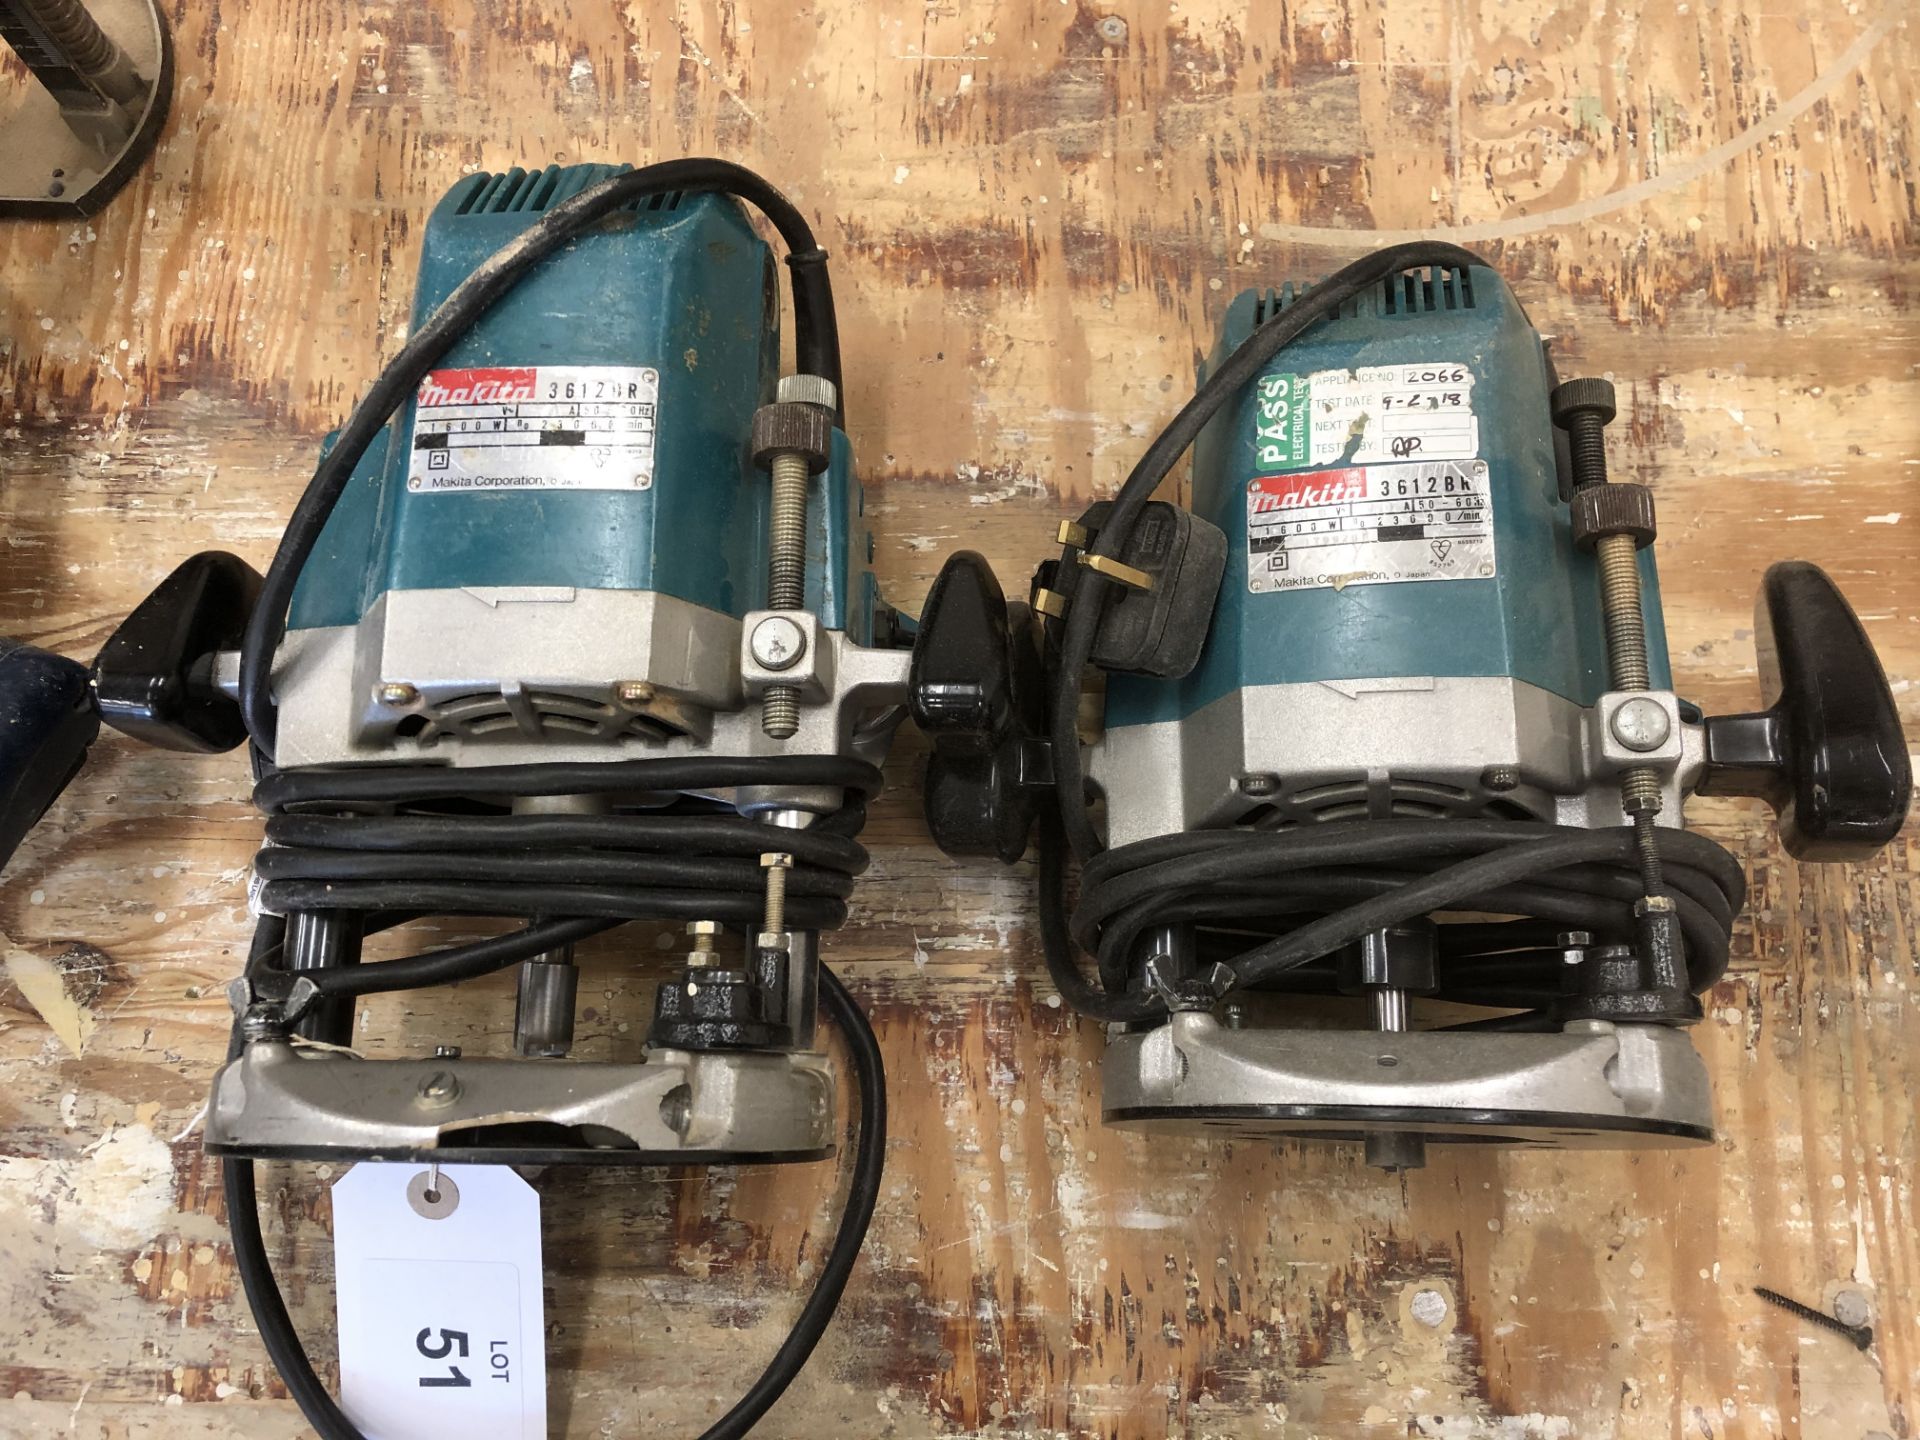 (2) Makita 3612BR Plunge Routers